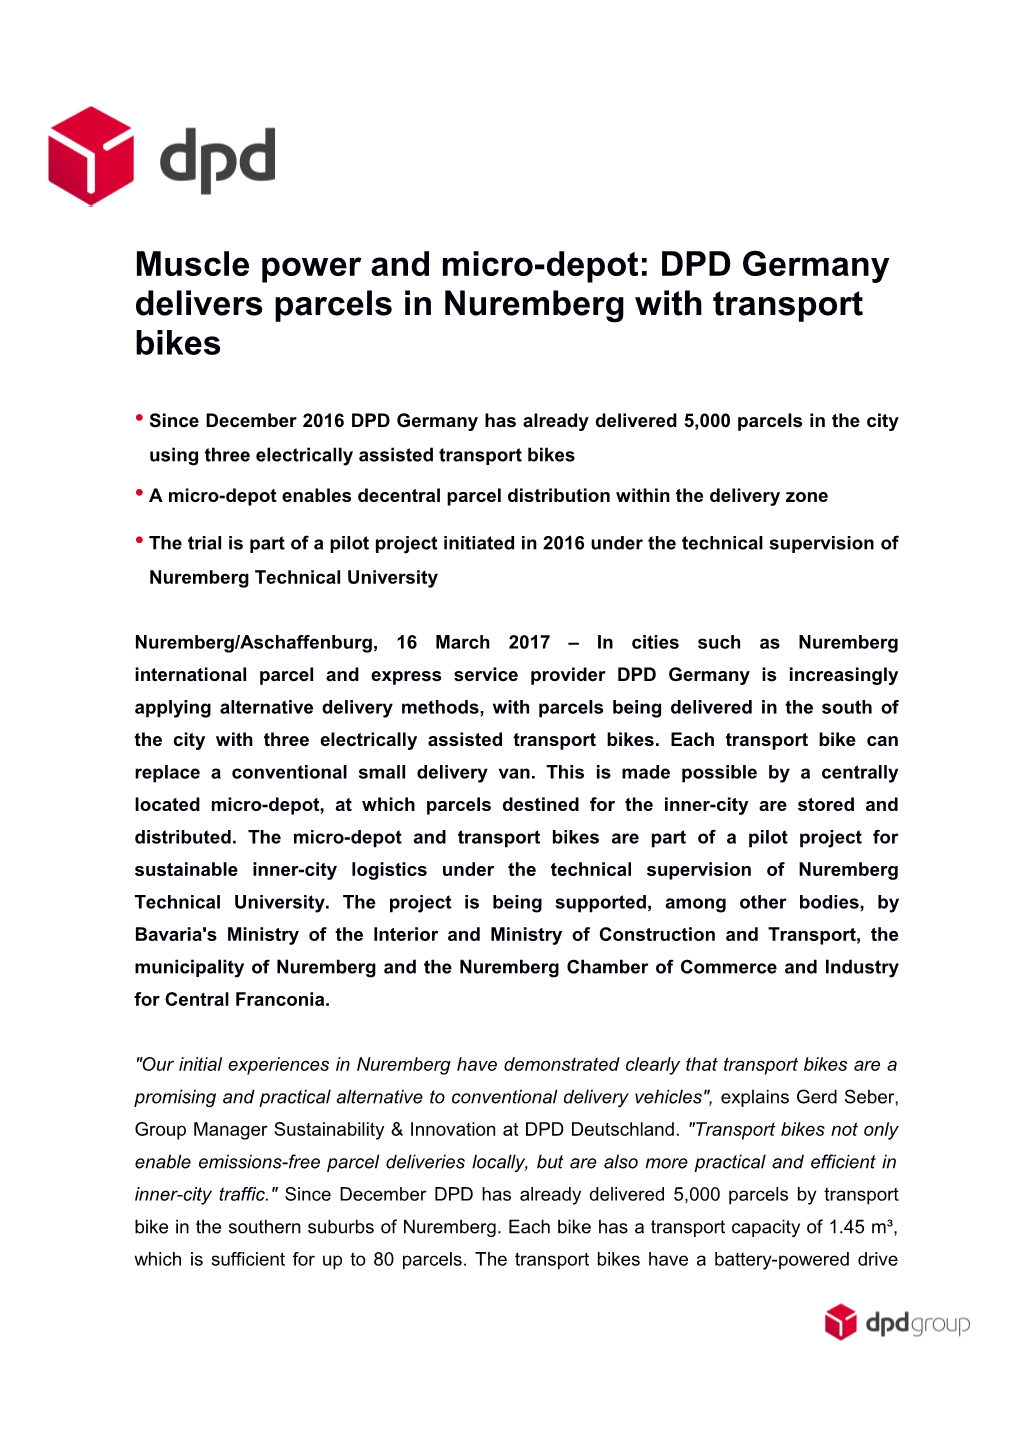 Muscle Power and Micro-Depot: DPD Germany Delivers Parcels in Nuremberg with Transport Bikes